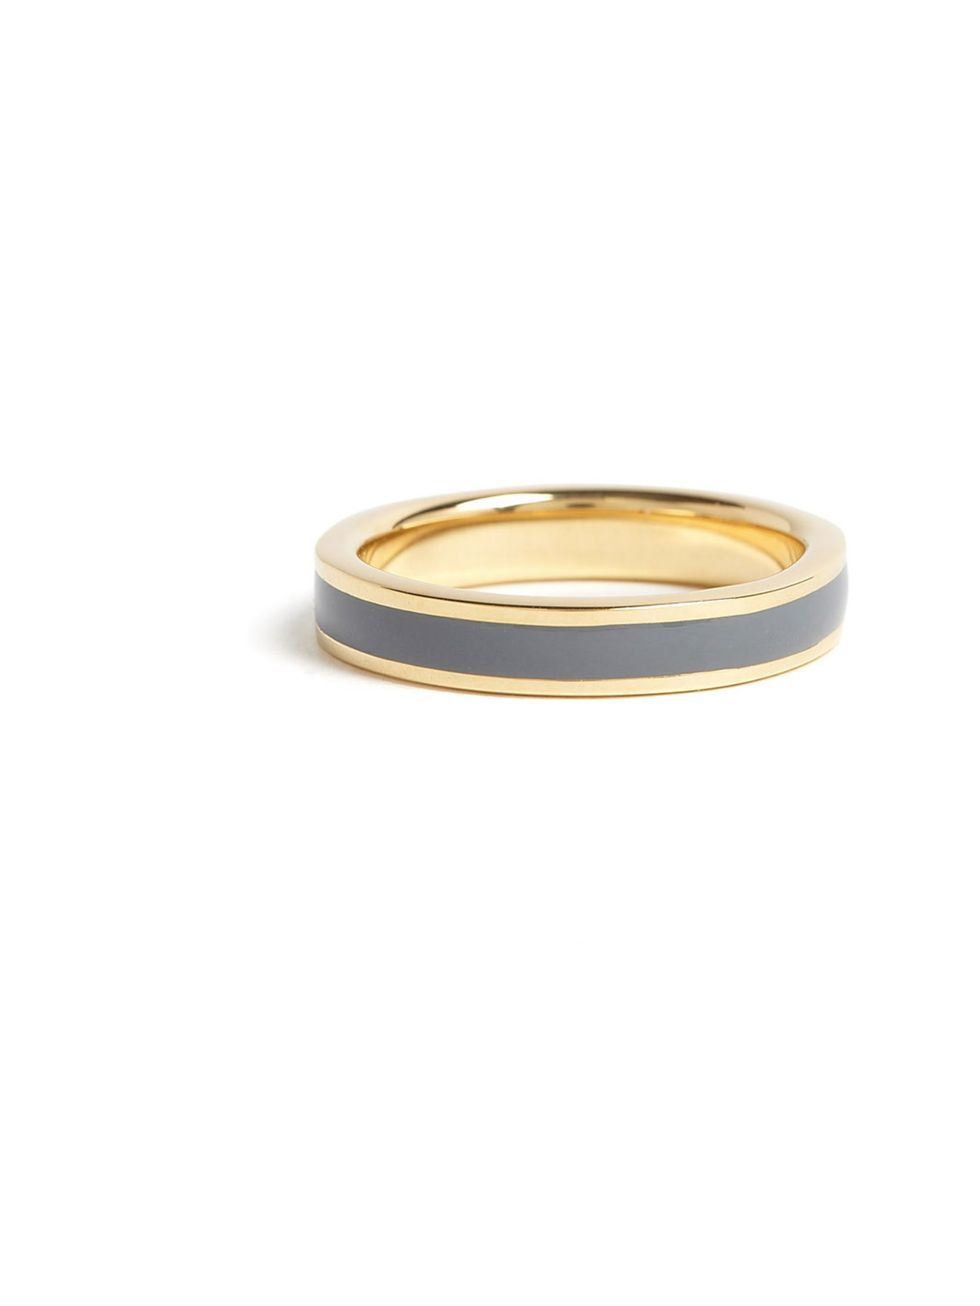 <p>Astley Clarke enamel ring, £55, at mywardrobe.com</p><p><a href="http://shopping.elleuk.com/browse?fts=astley+clarke+enamel+ring+my-wardrobe">BUY NOW</a></p>